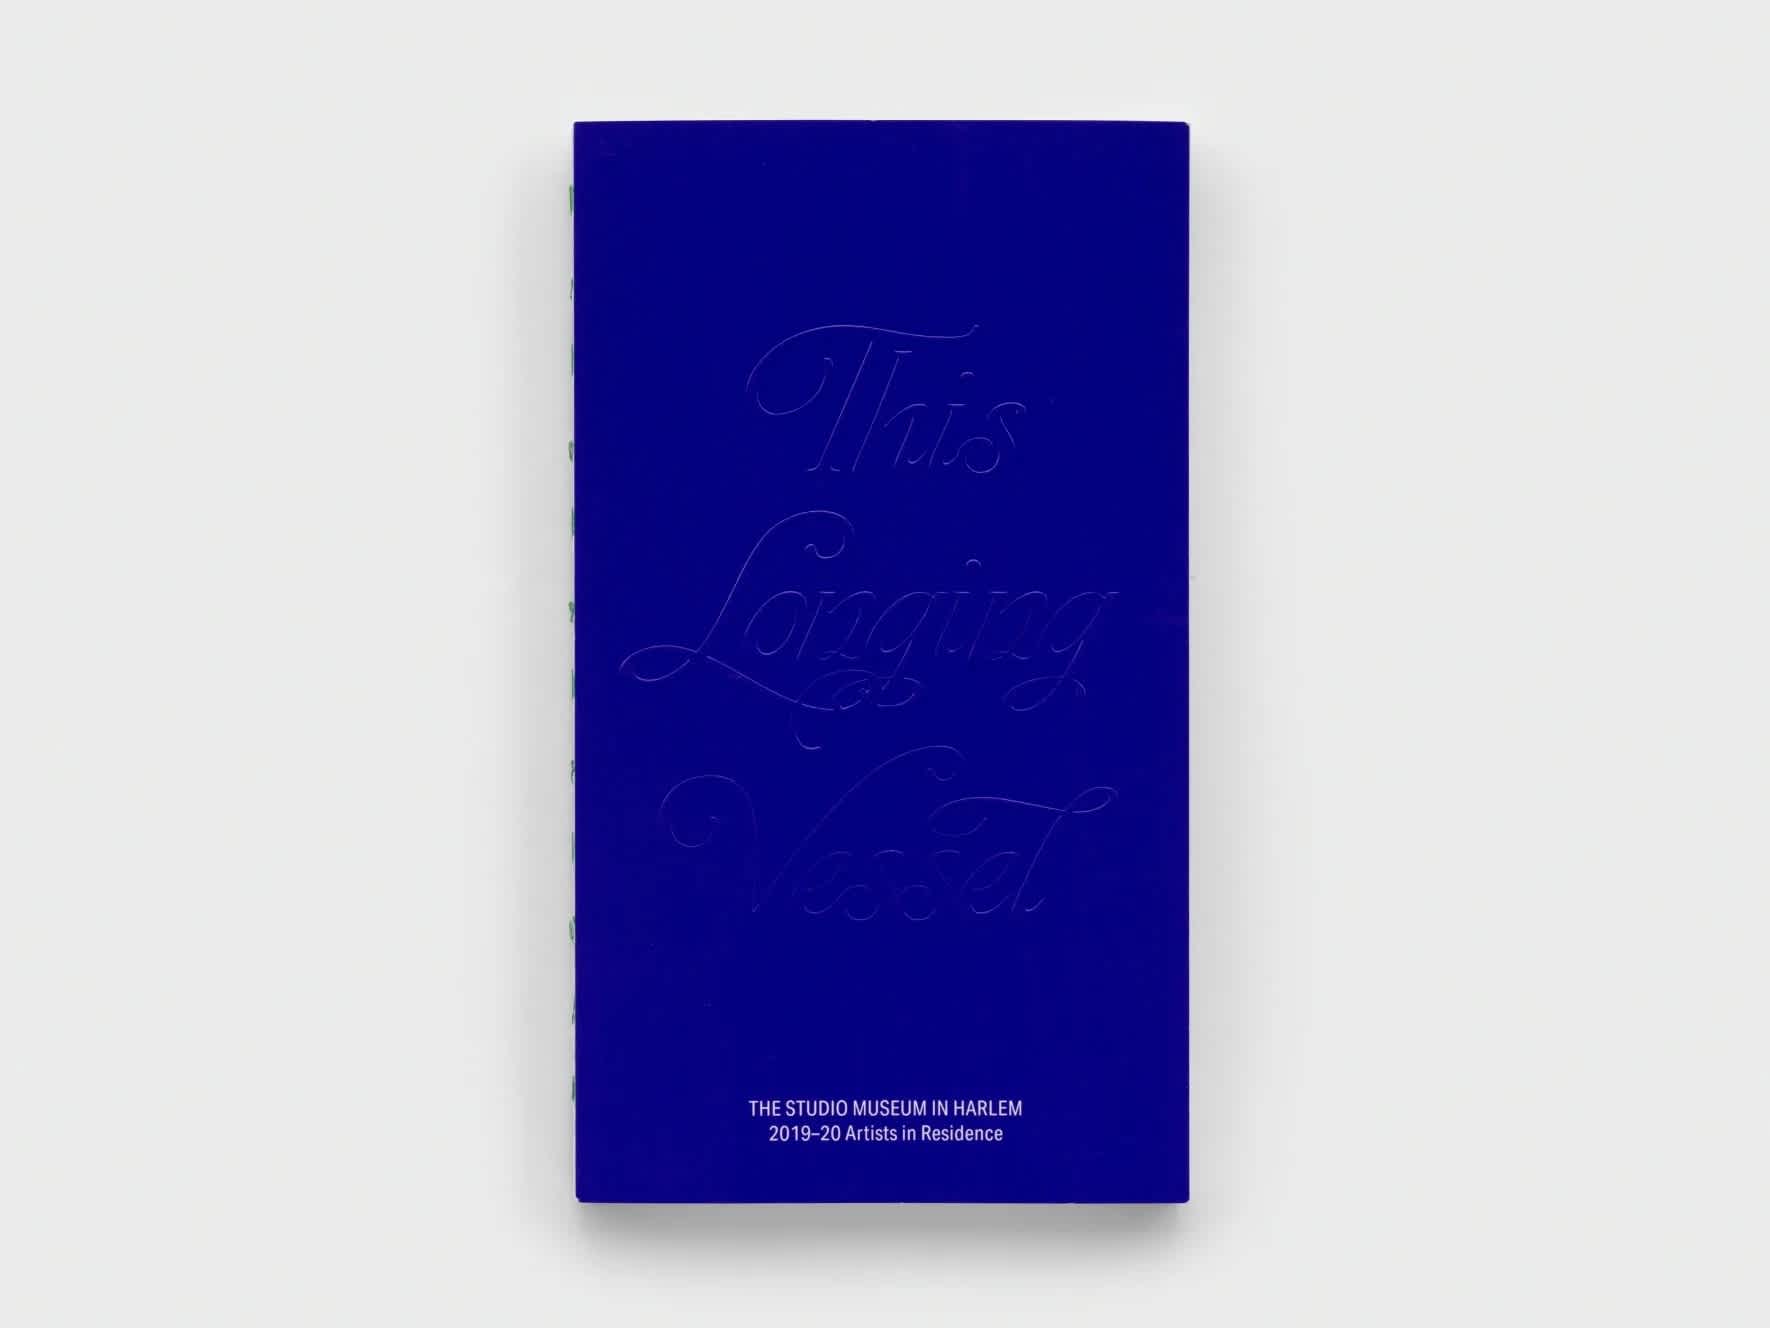 Royal blue book with embossed title.